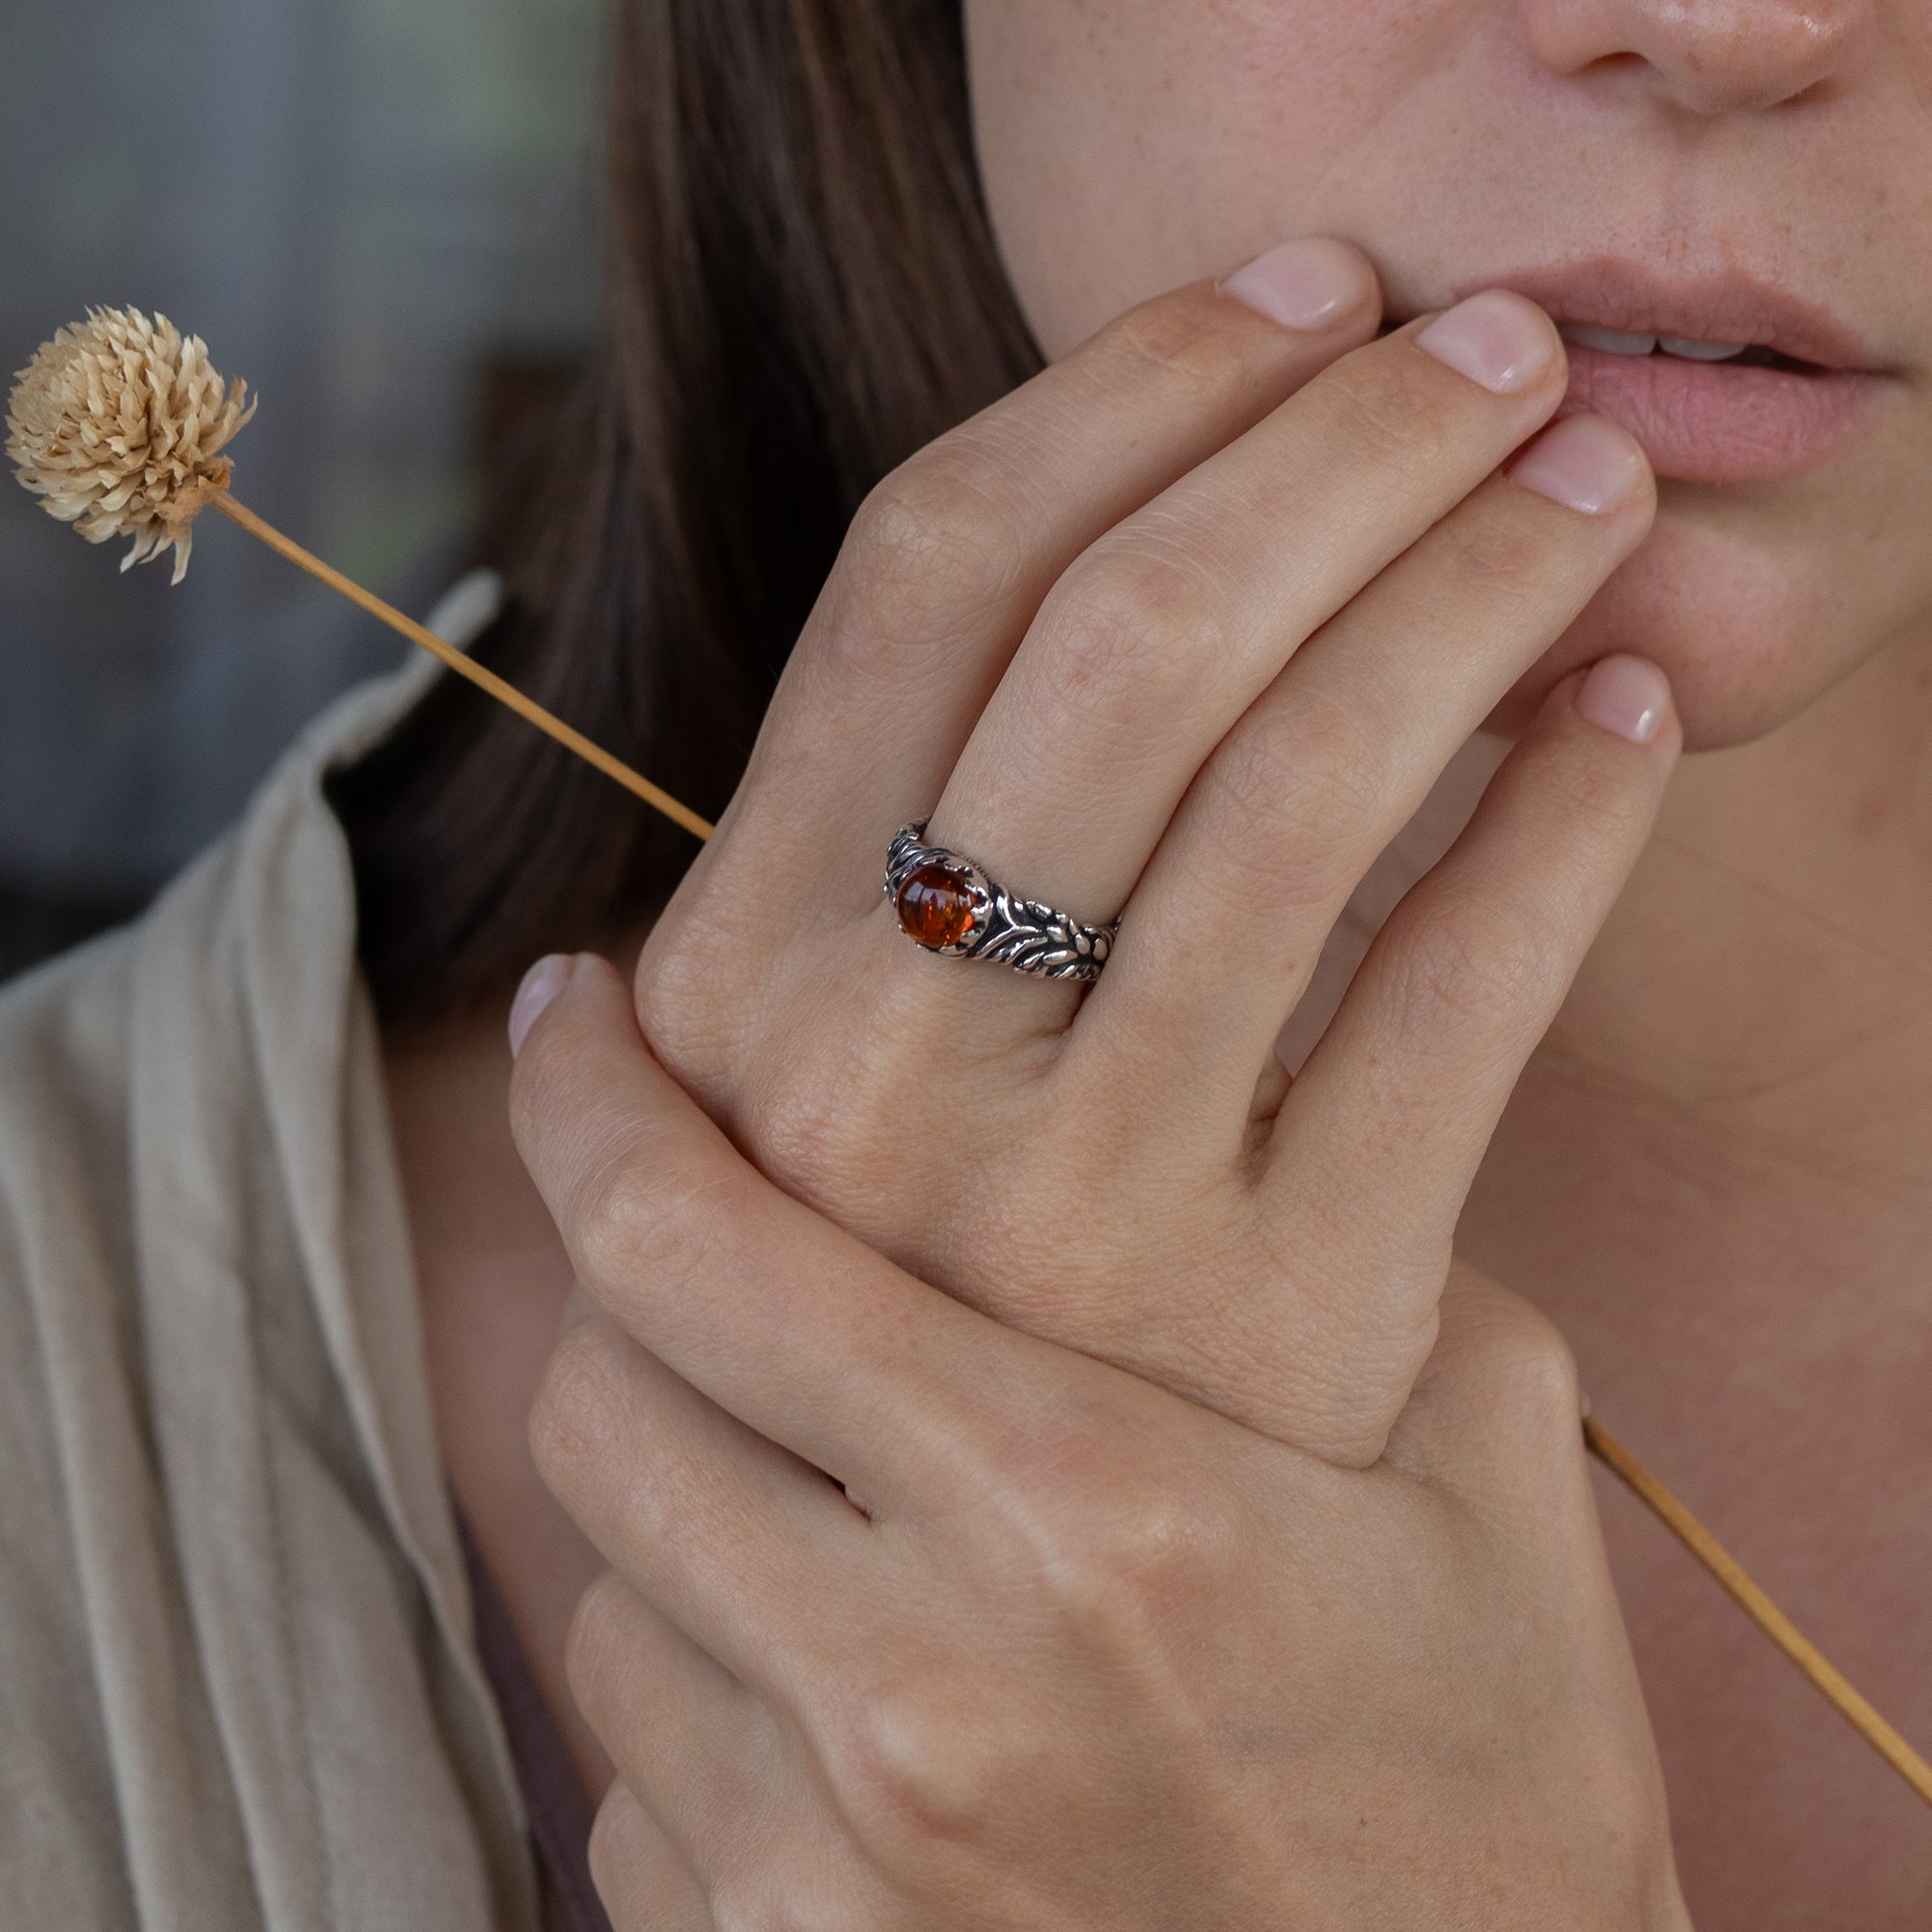 Engagement Ana ring with Amber on hand by BlackTreeLab